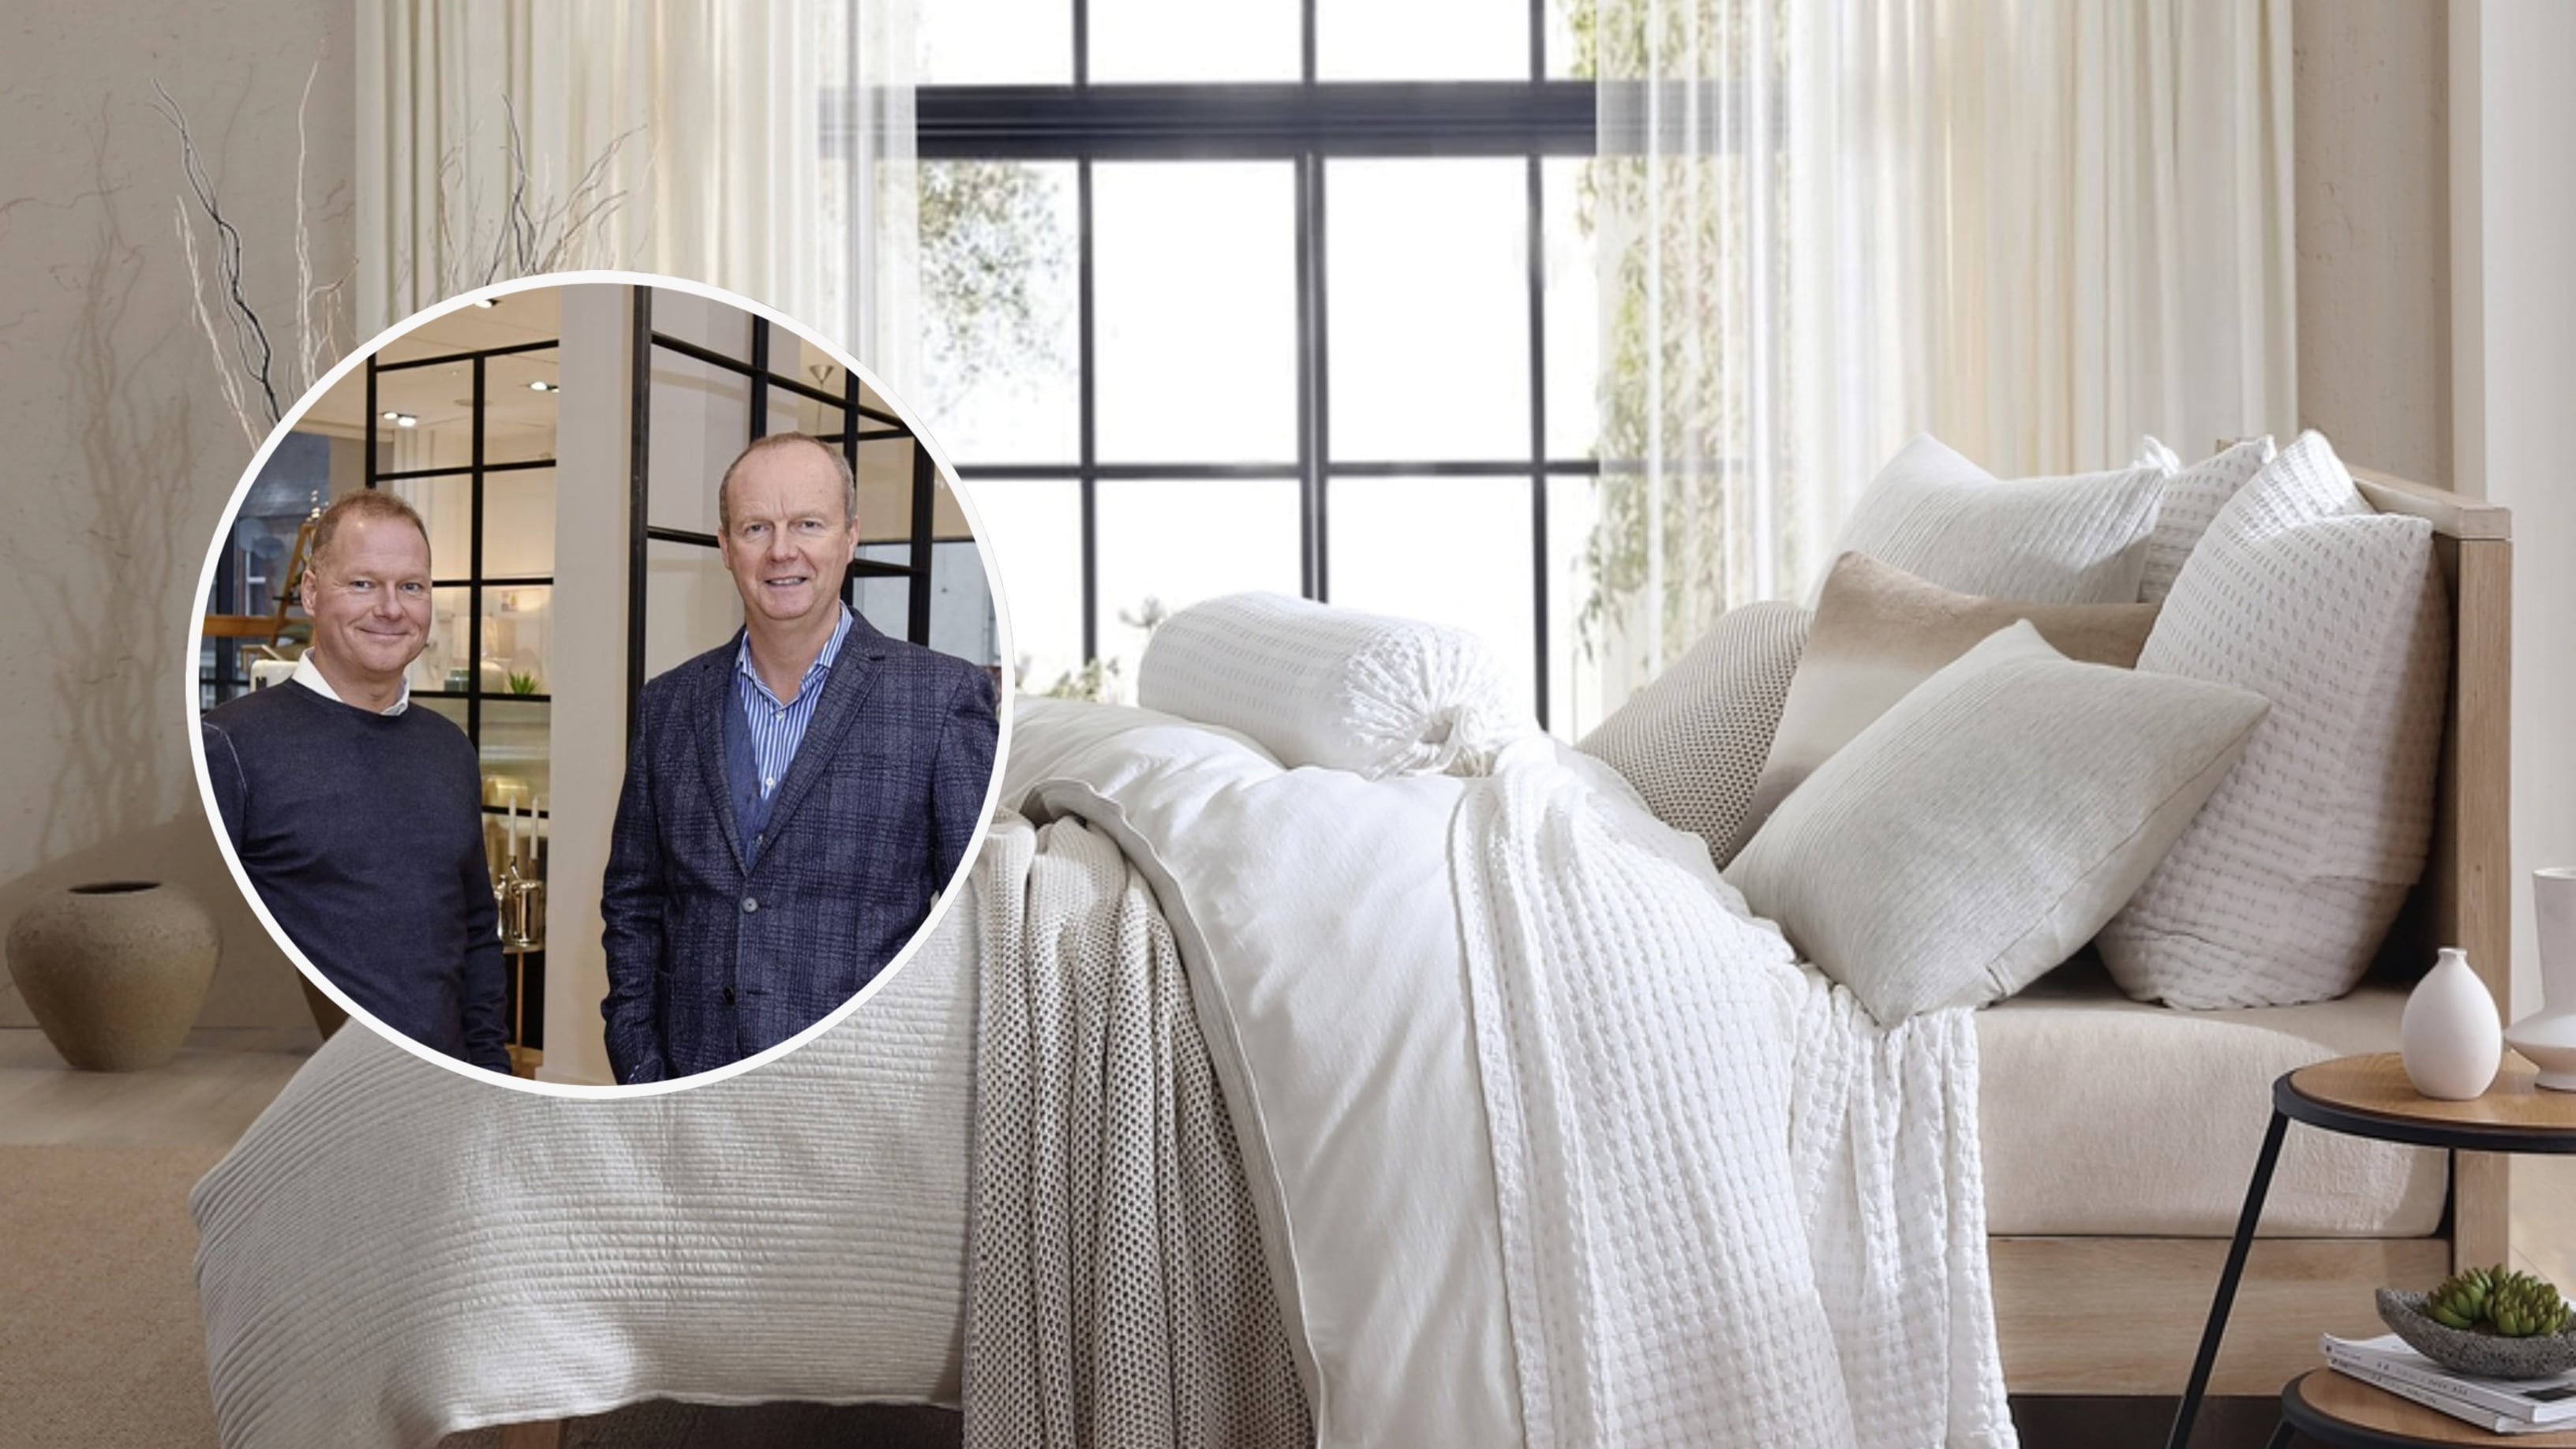 Bedeck's joint managing directors, Andrew and Gary Irwin (inset image) against an image of a bed.